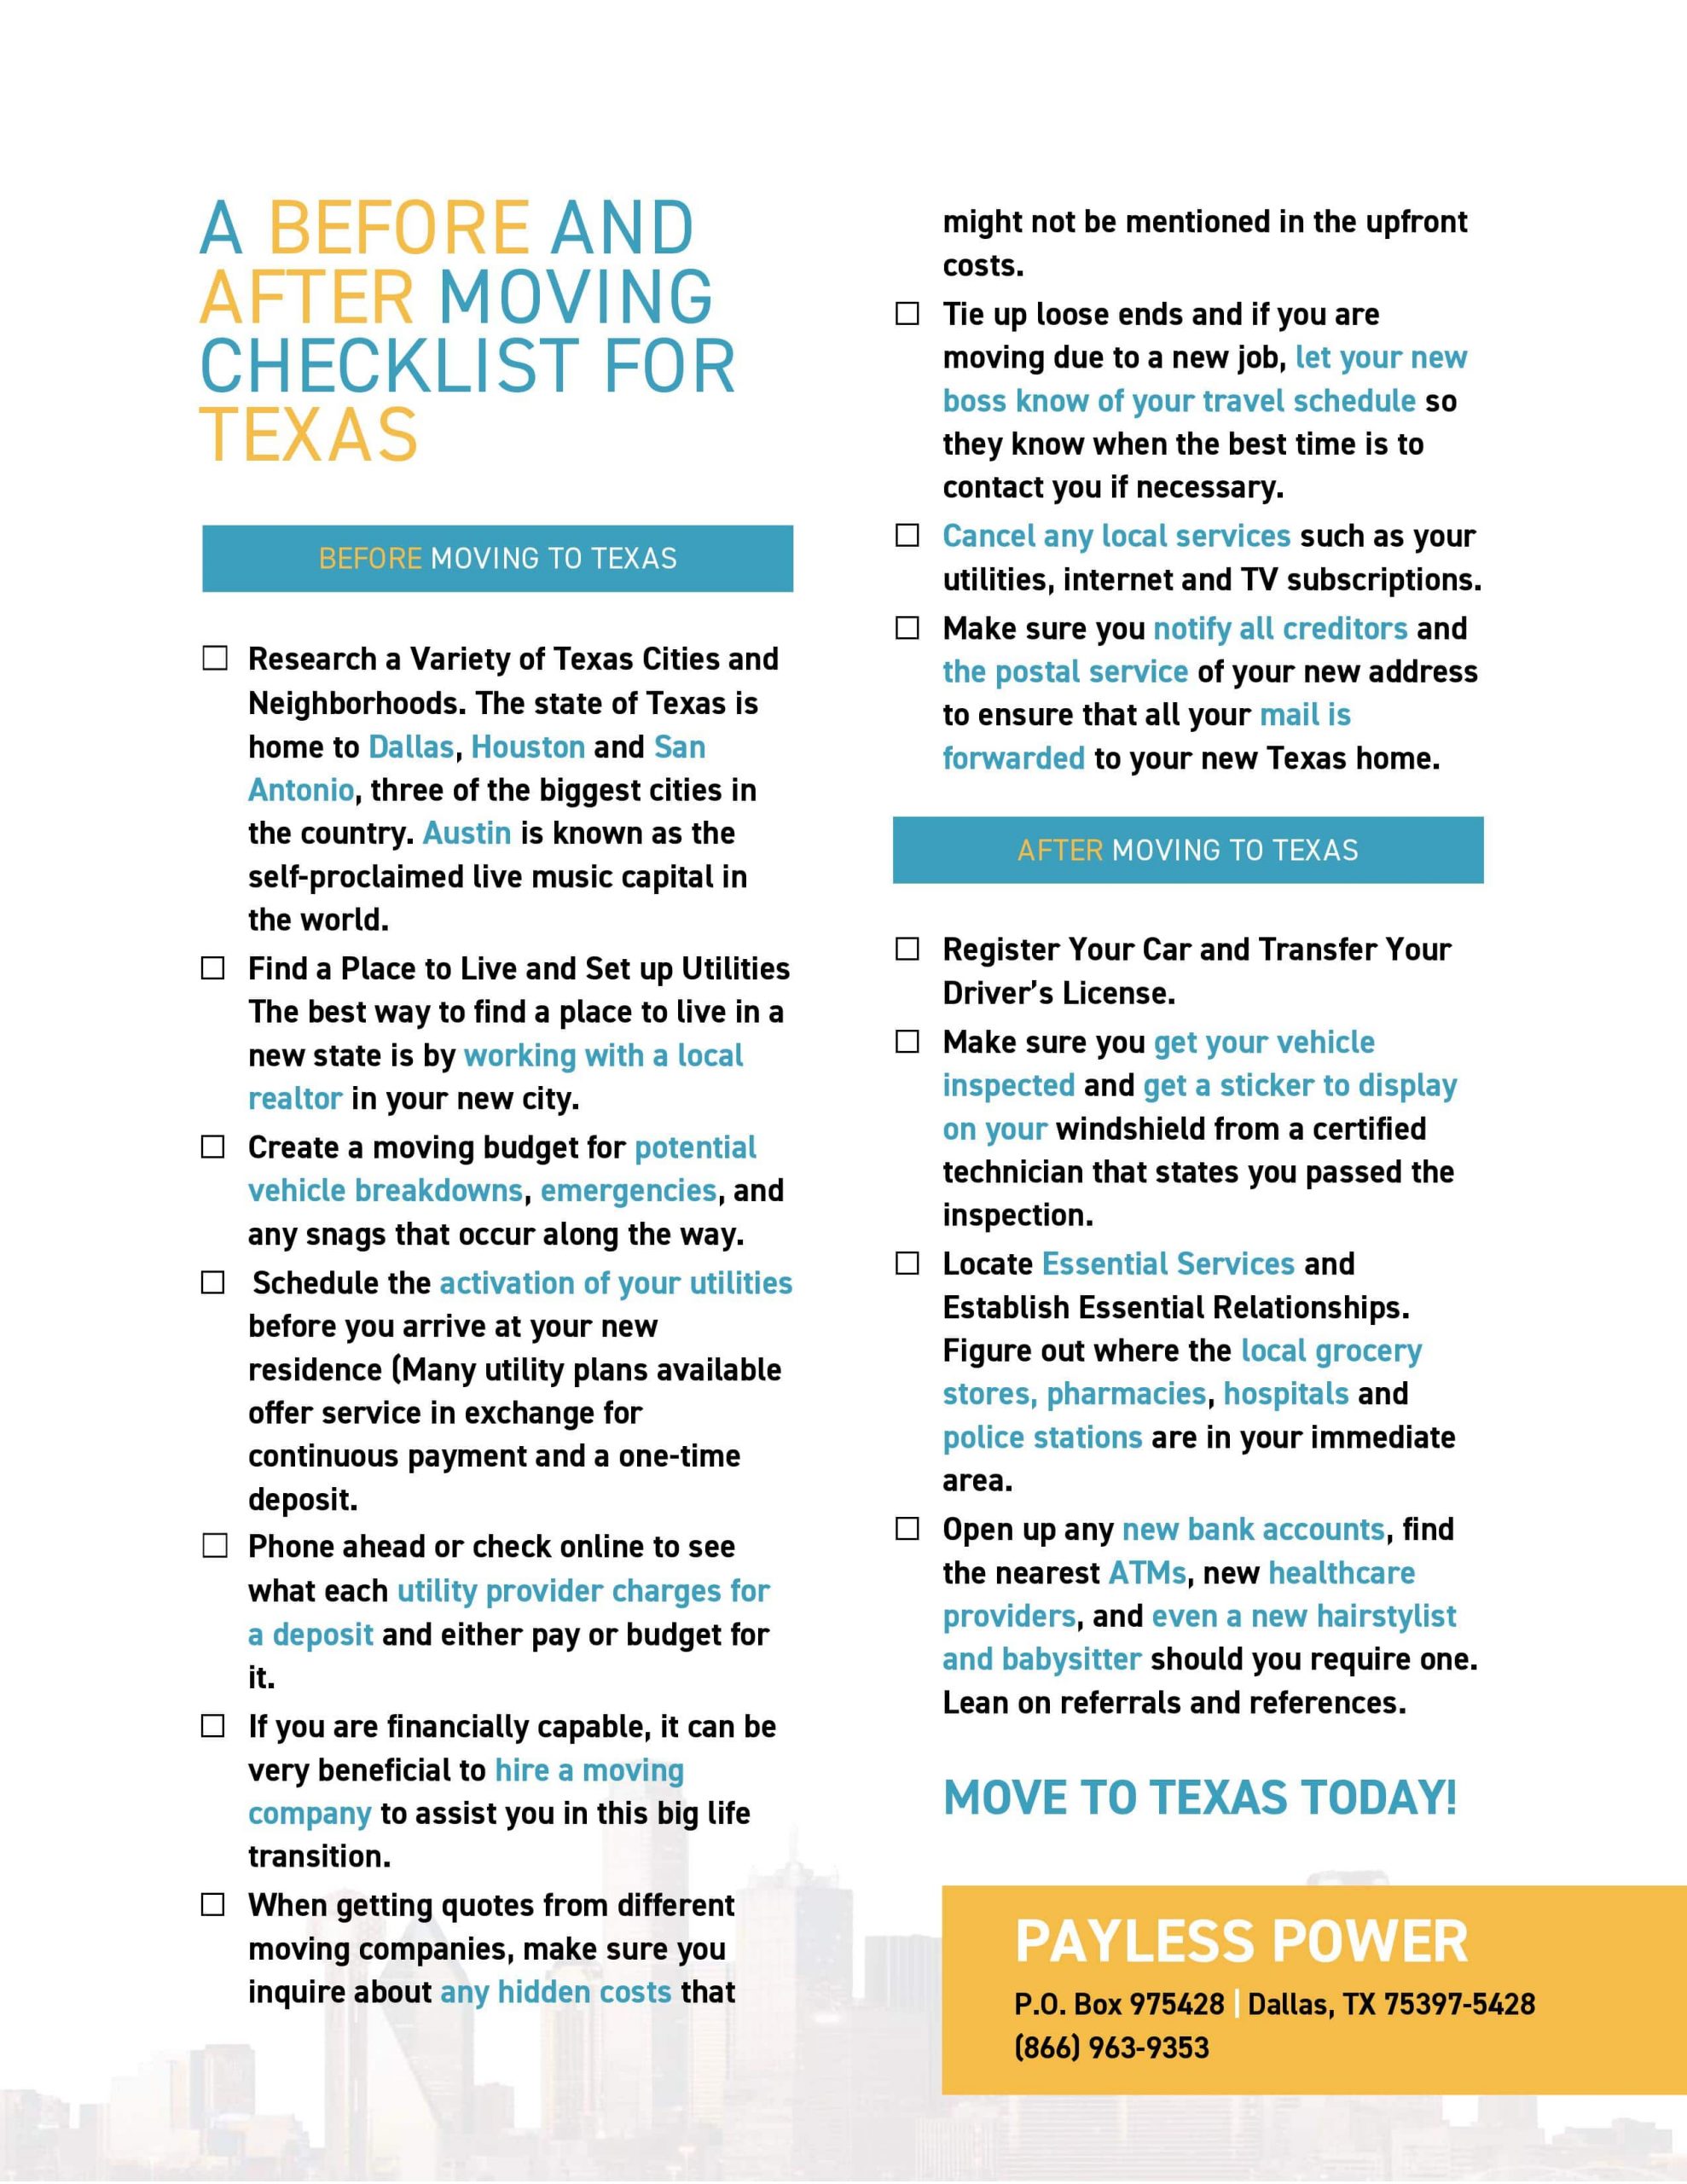 https://paylesspower.com/wp-content/uploads/2020/06/Texas-Moving-Checklist-min-scaled.jpg